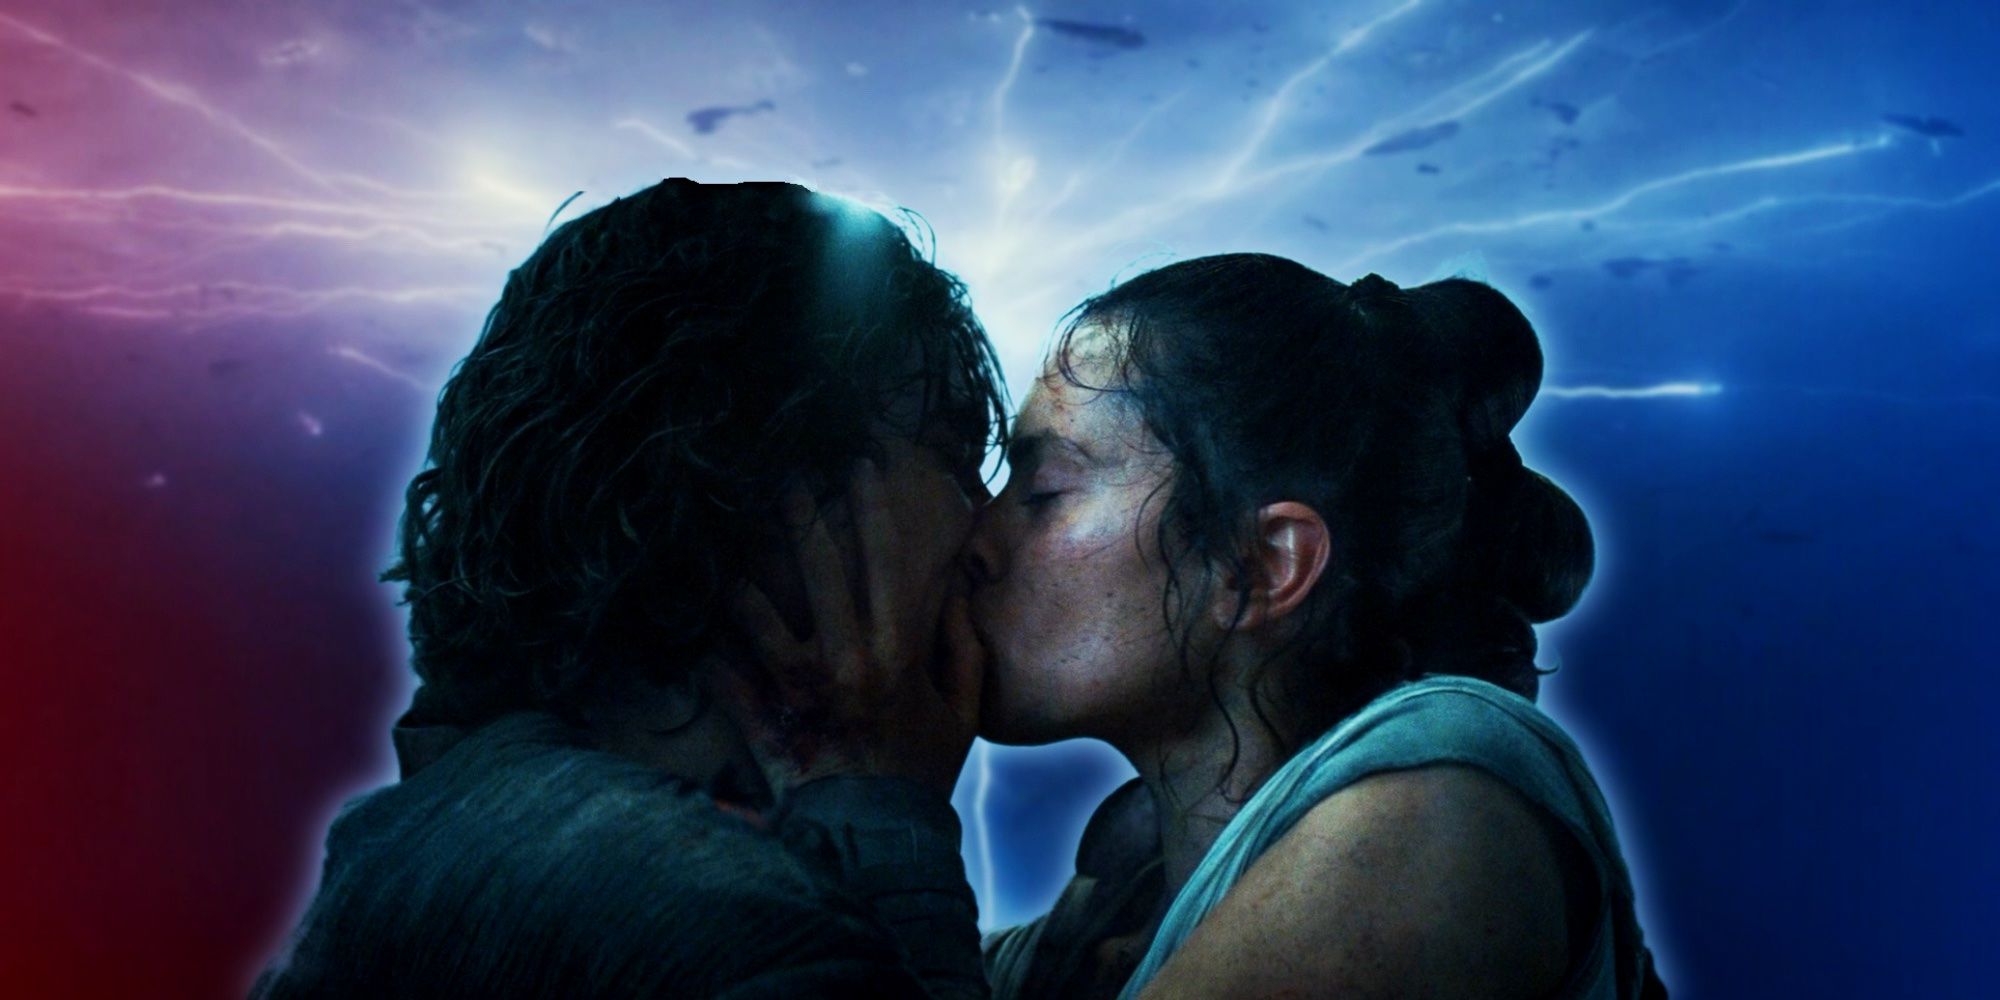 Rey and Ben Solo kissing representing the Force dyad in The Rise of Skywalker